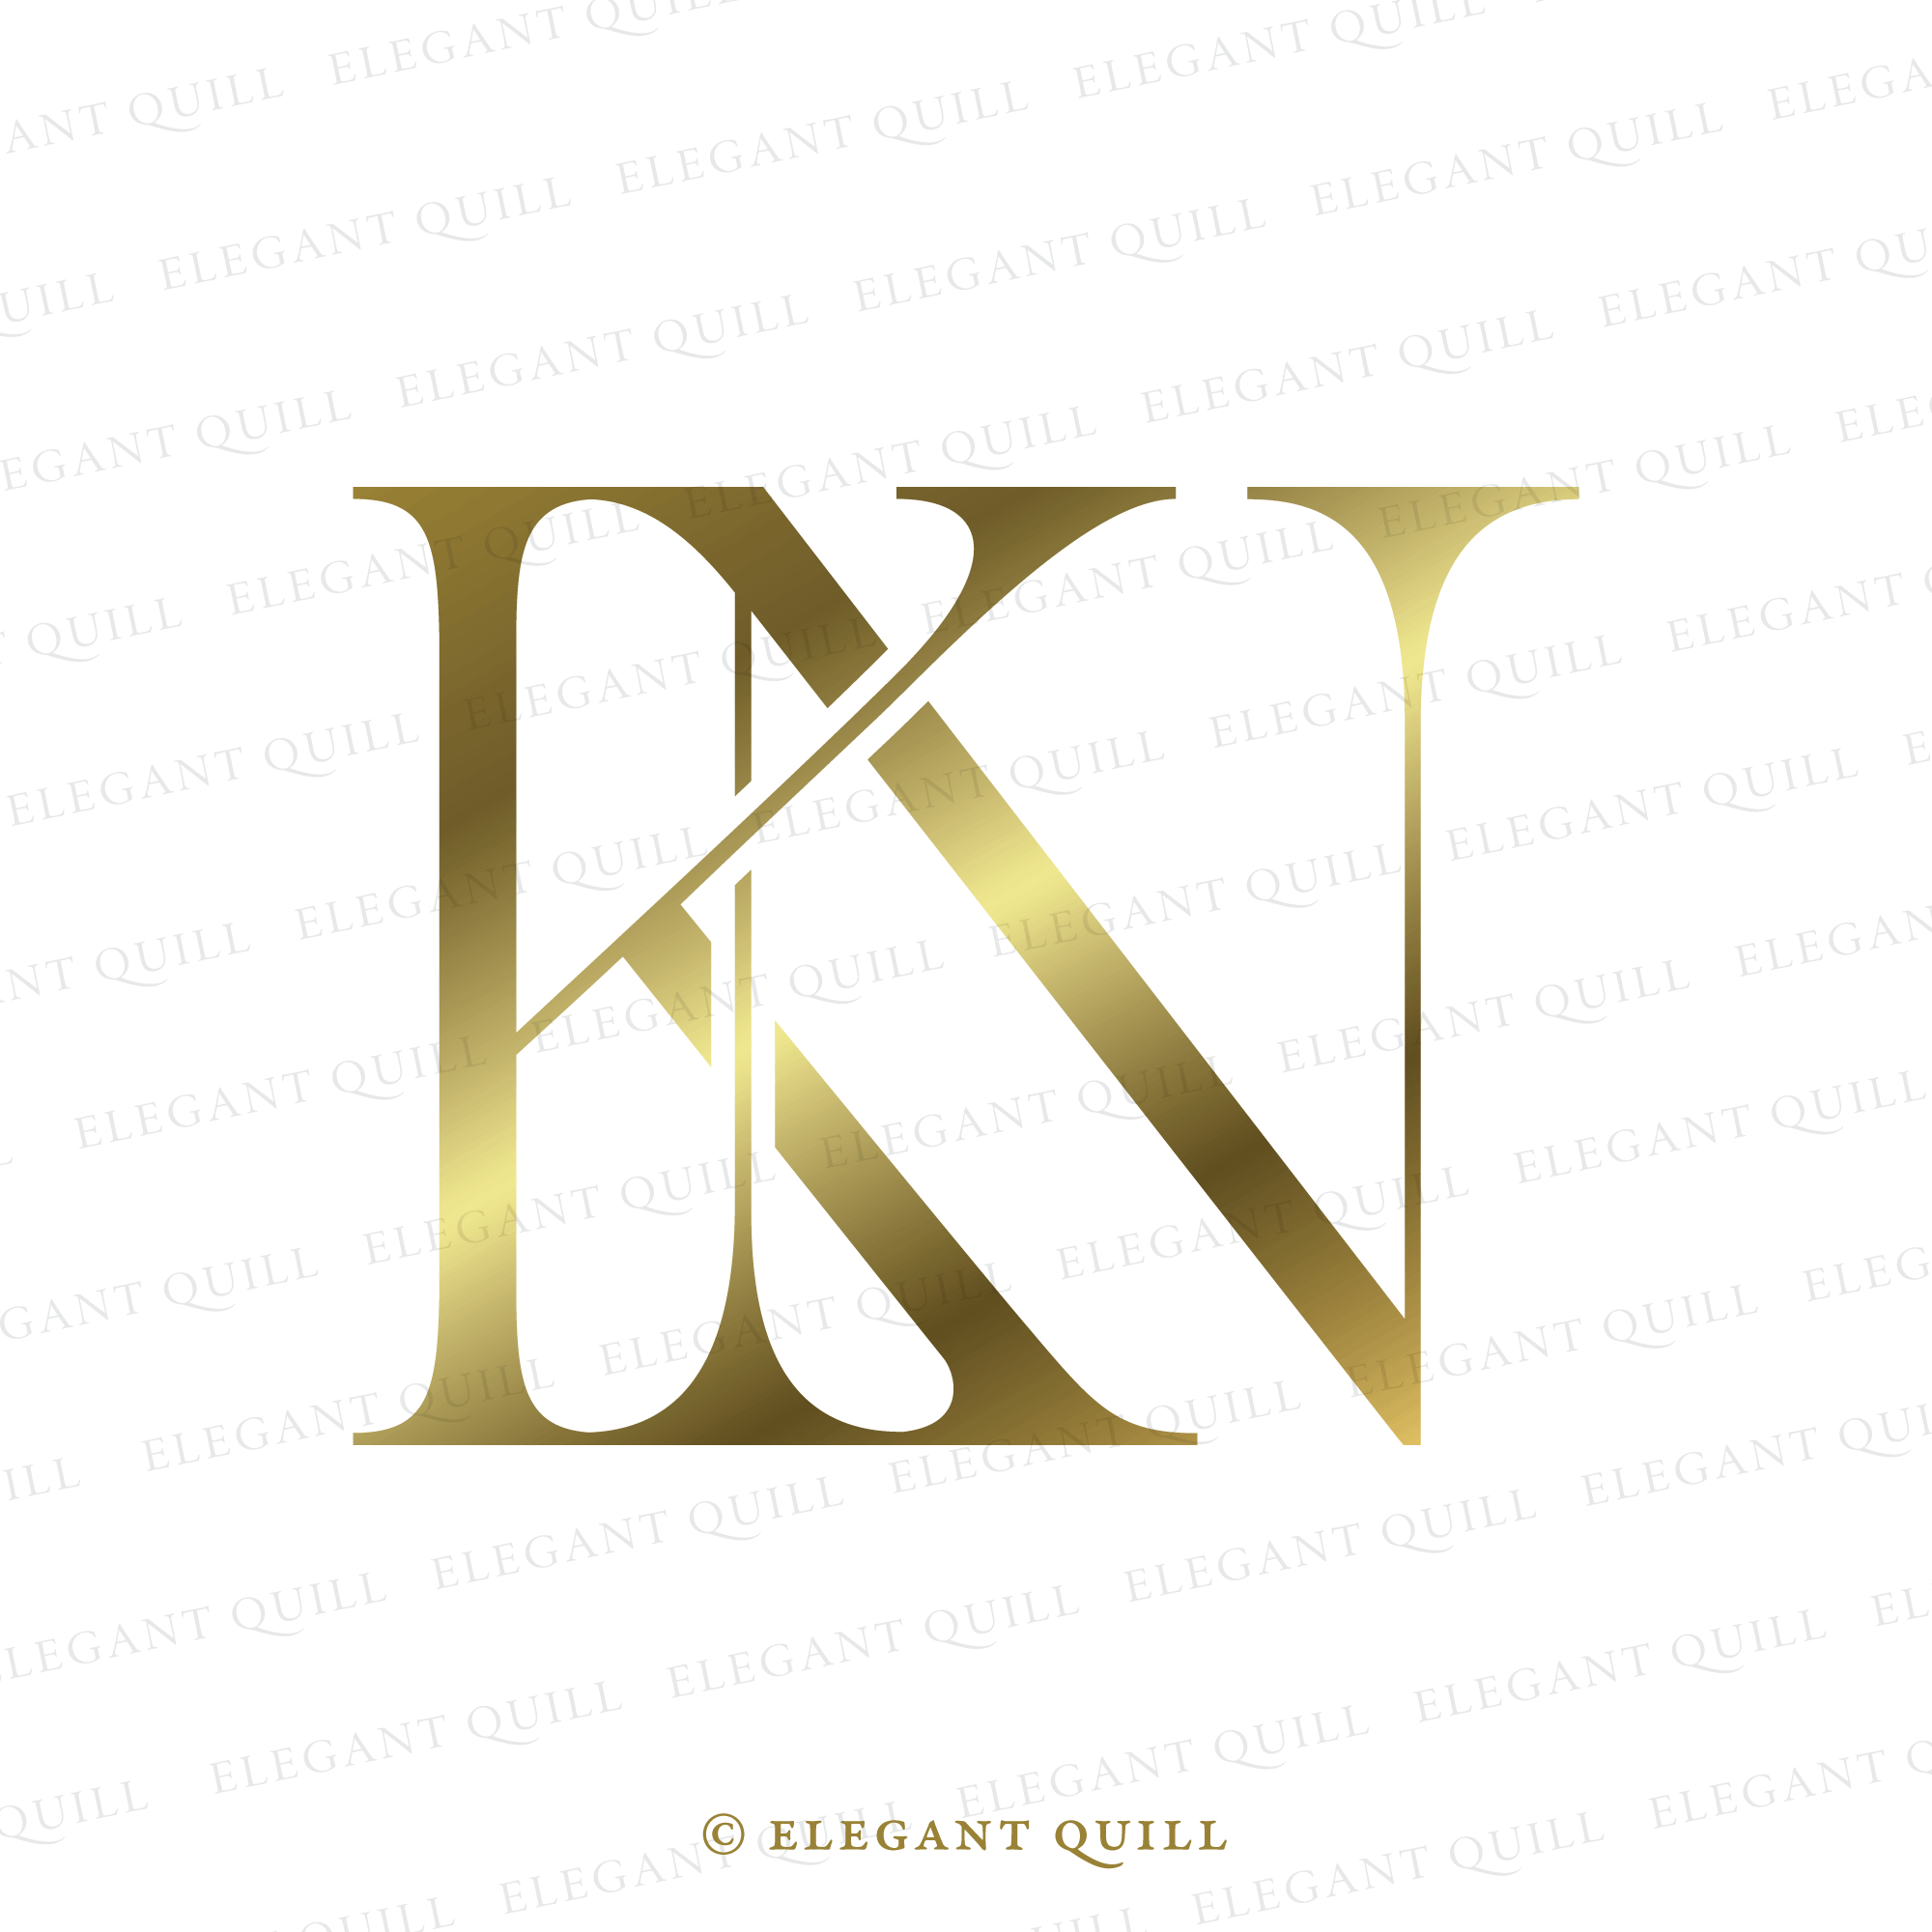 KN logo Template | PosterMyWall